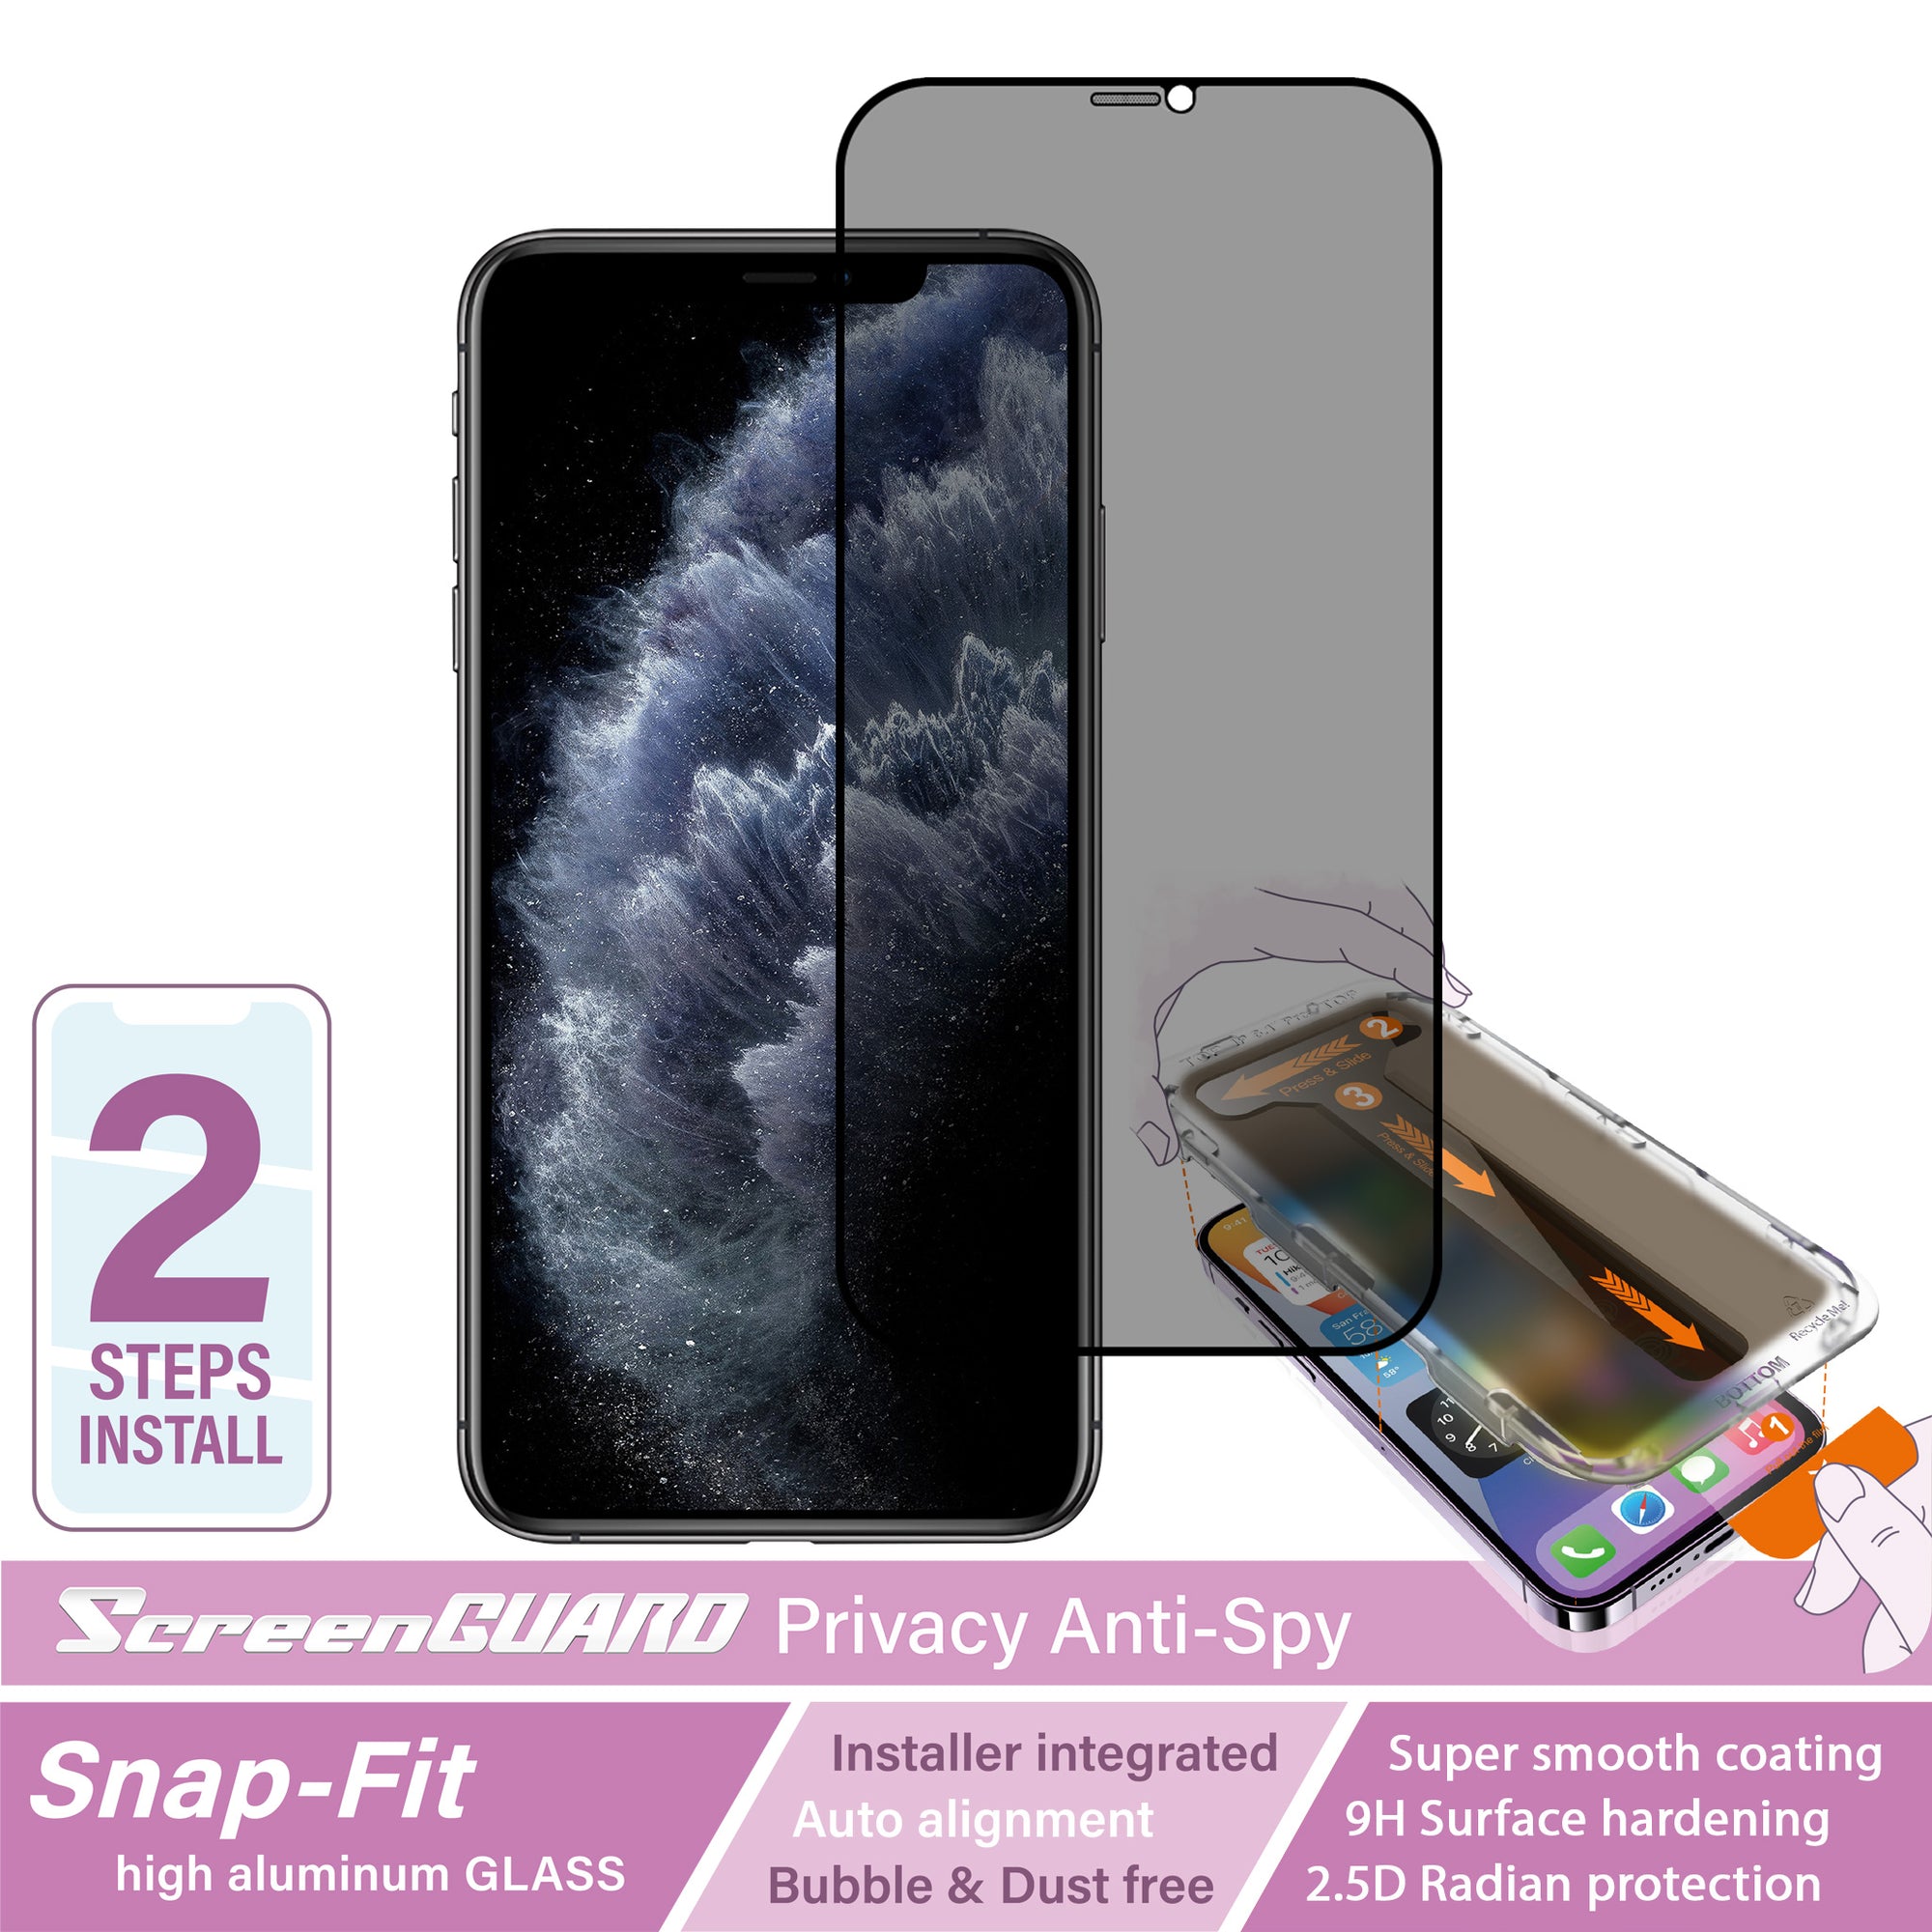 iPhone 11 Pro Max SnapFit High Aluminum Glass Privacy Screen Protector